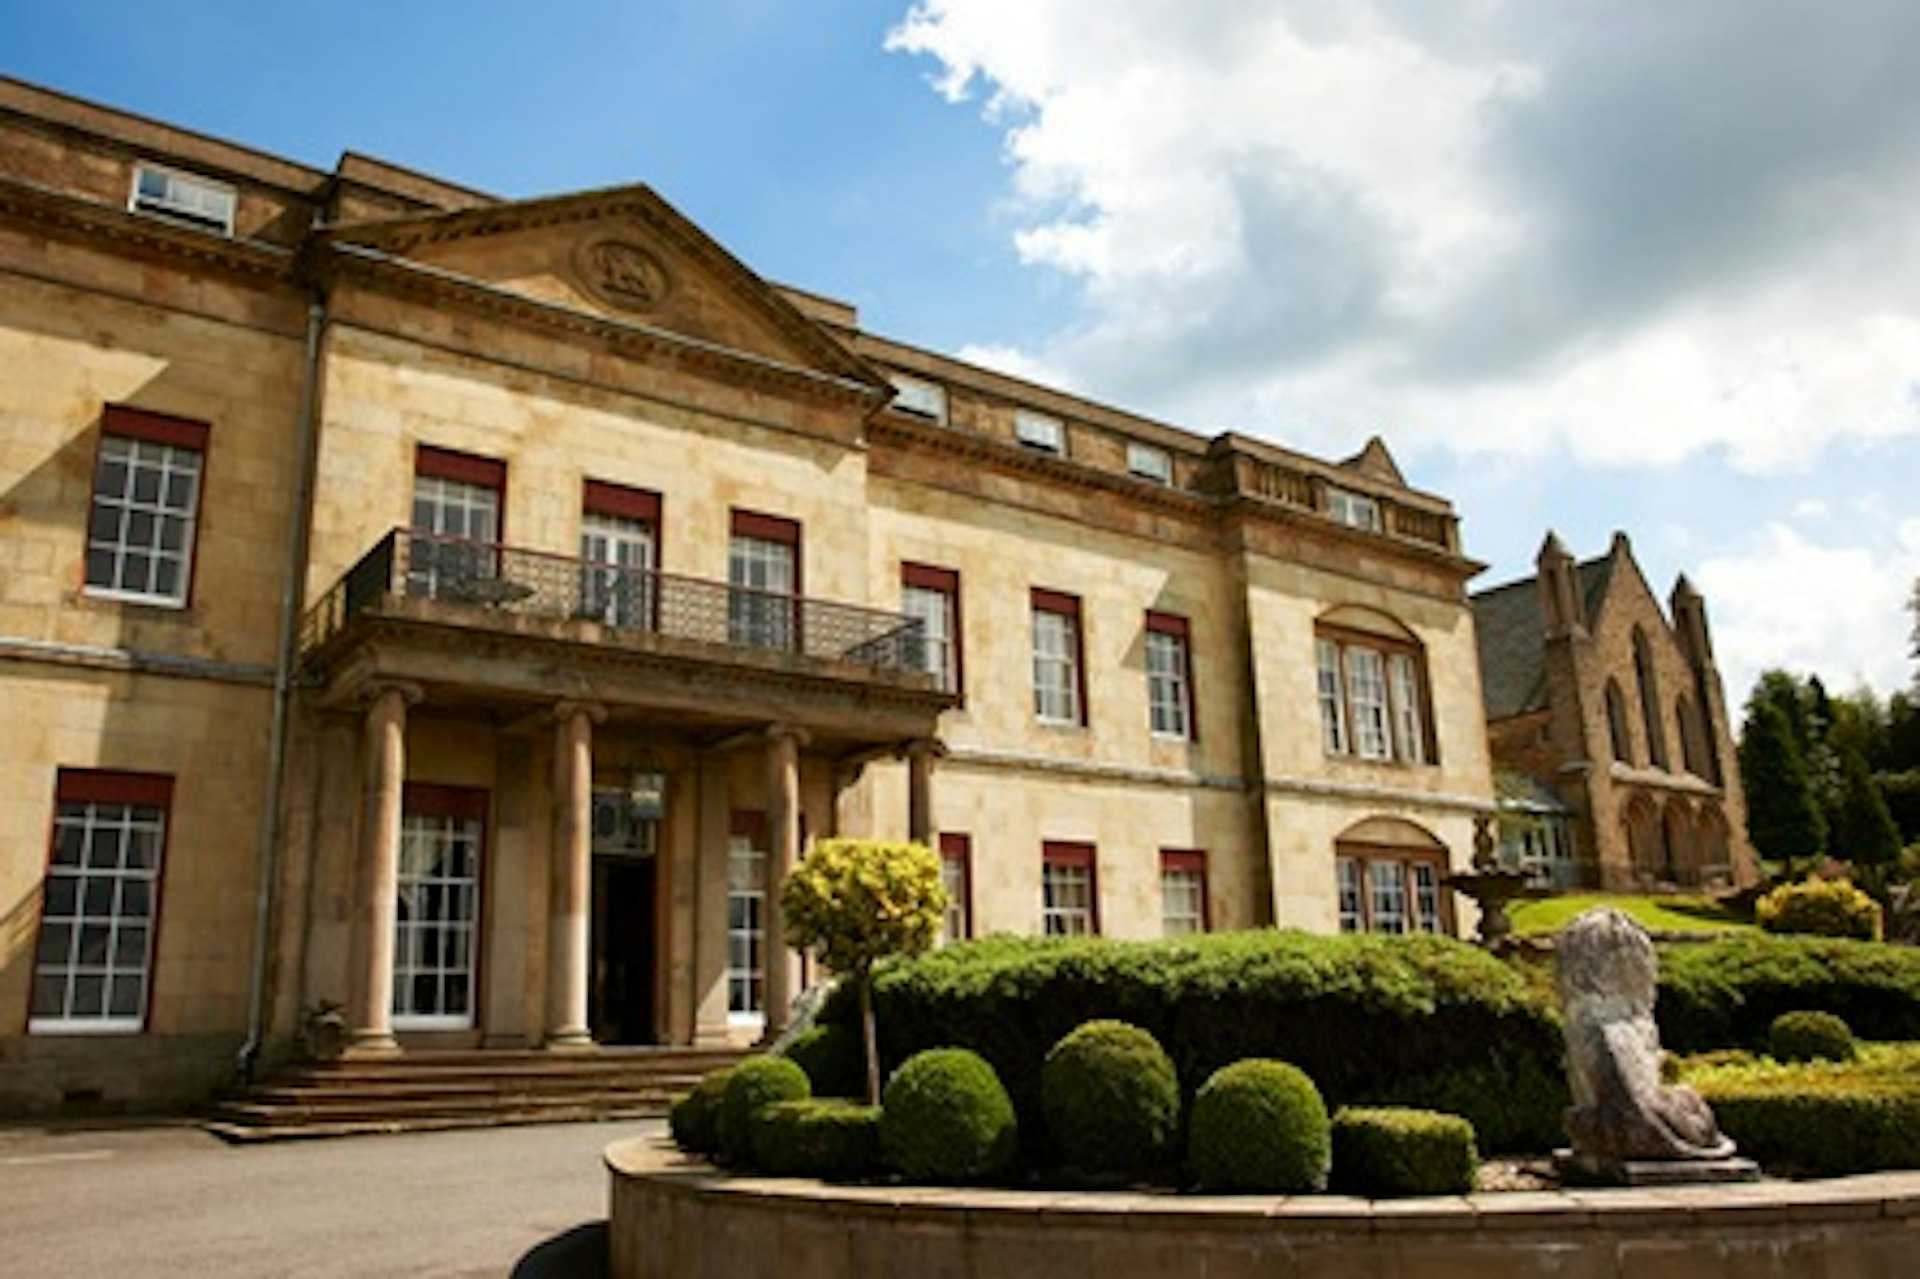 One Night Peak District Break with Dinner for Two at The Shrigley Hall Hotel & Spa 2